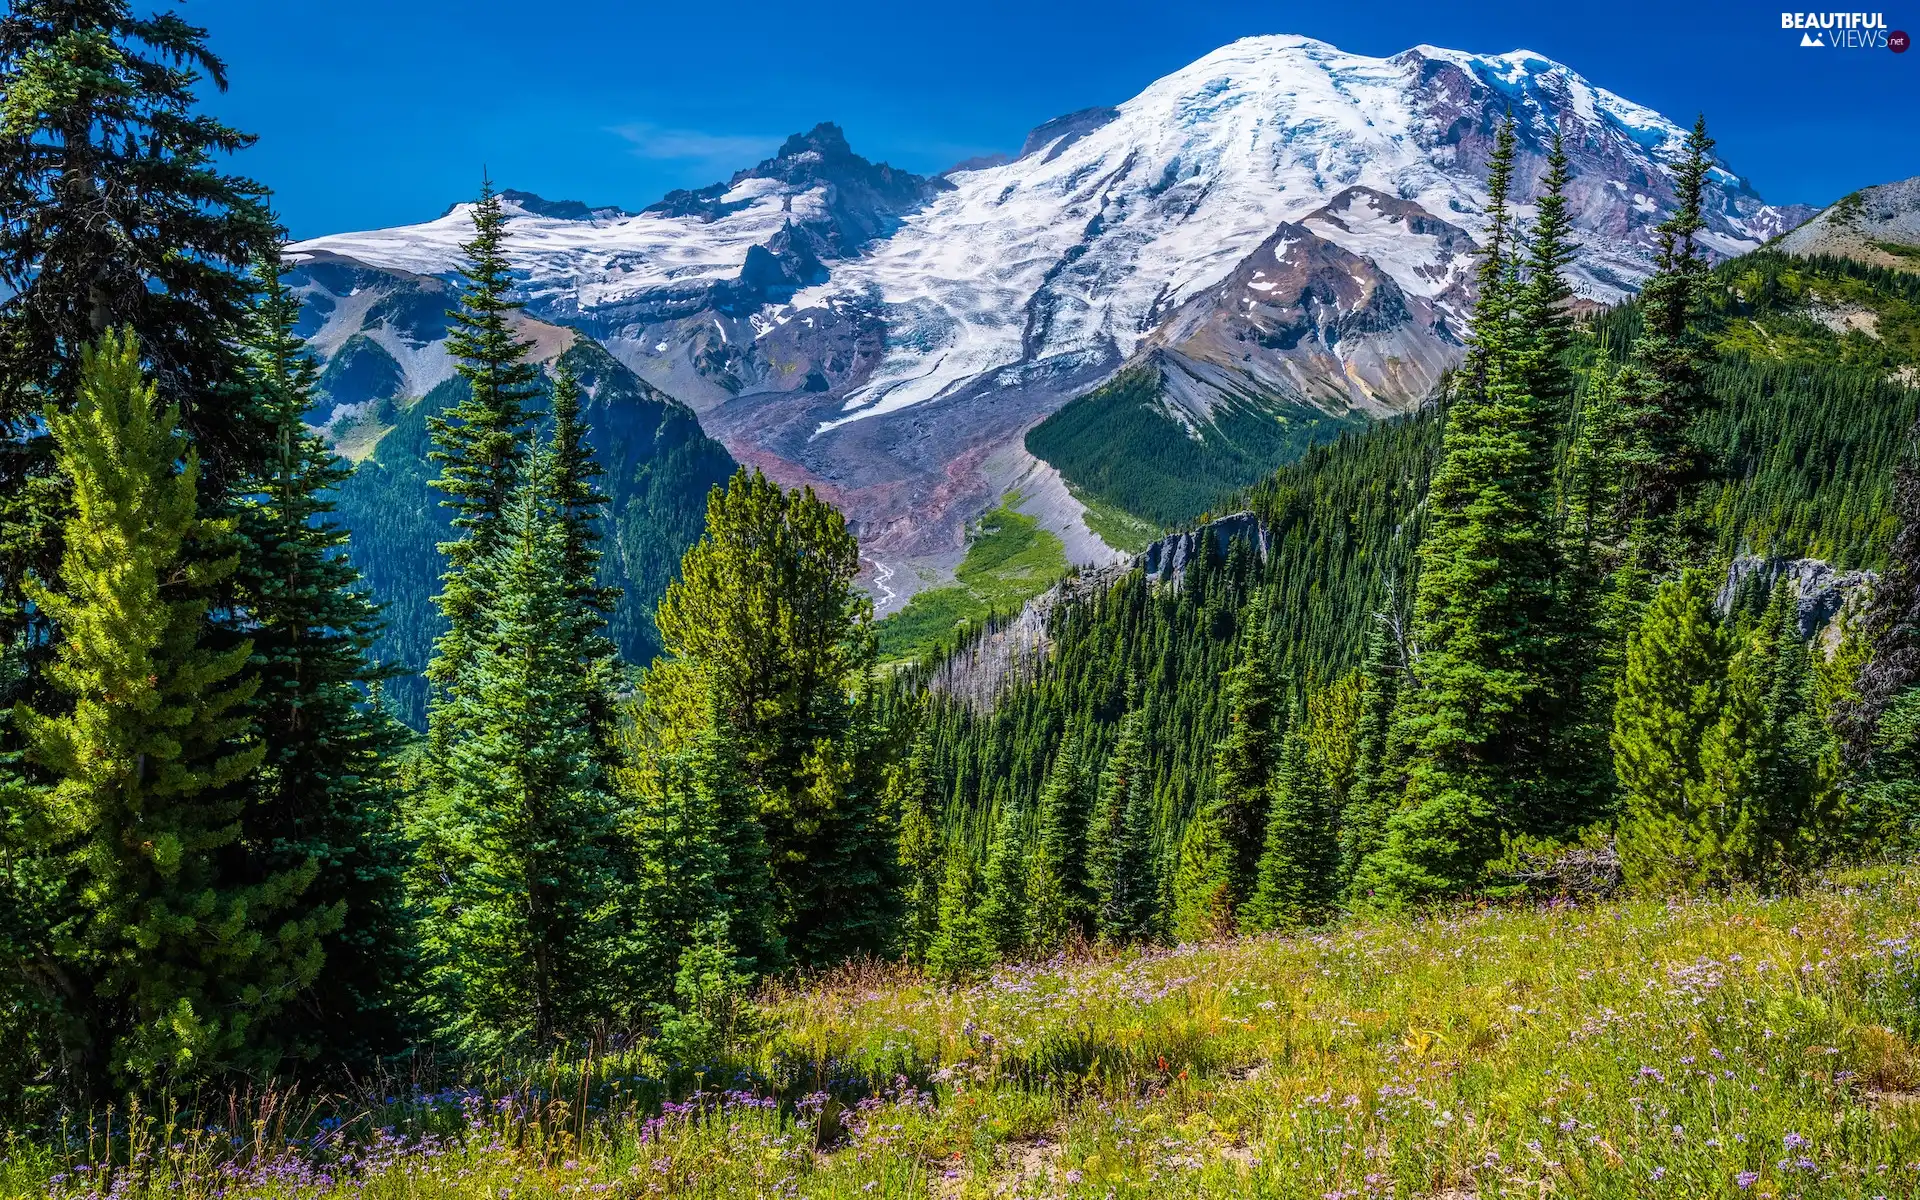 trees, Snowy, Spruces, viewes, Meadow, The United States, Washington State, Stratovolcano Mount Rainier, Mountains, Mount Rainier National Park, Flowers